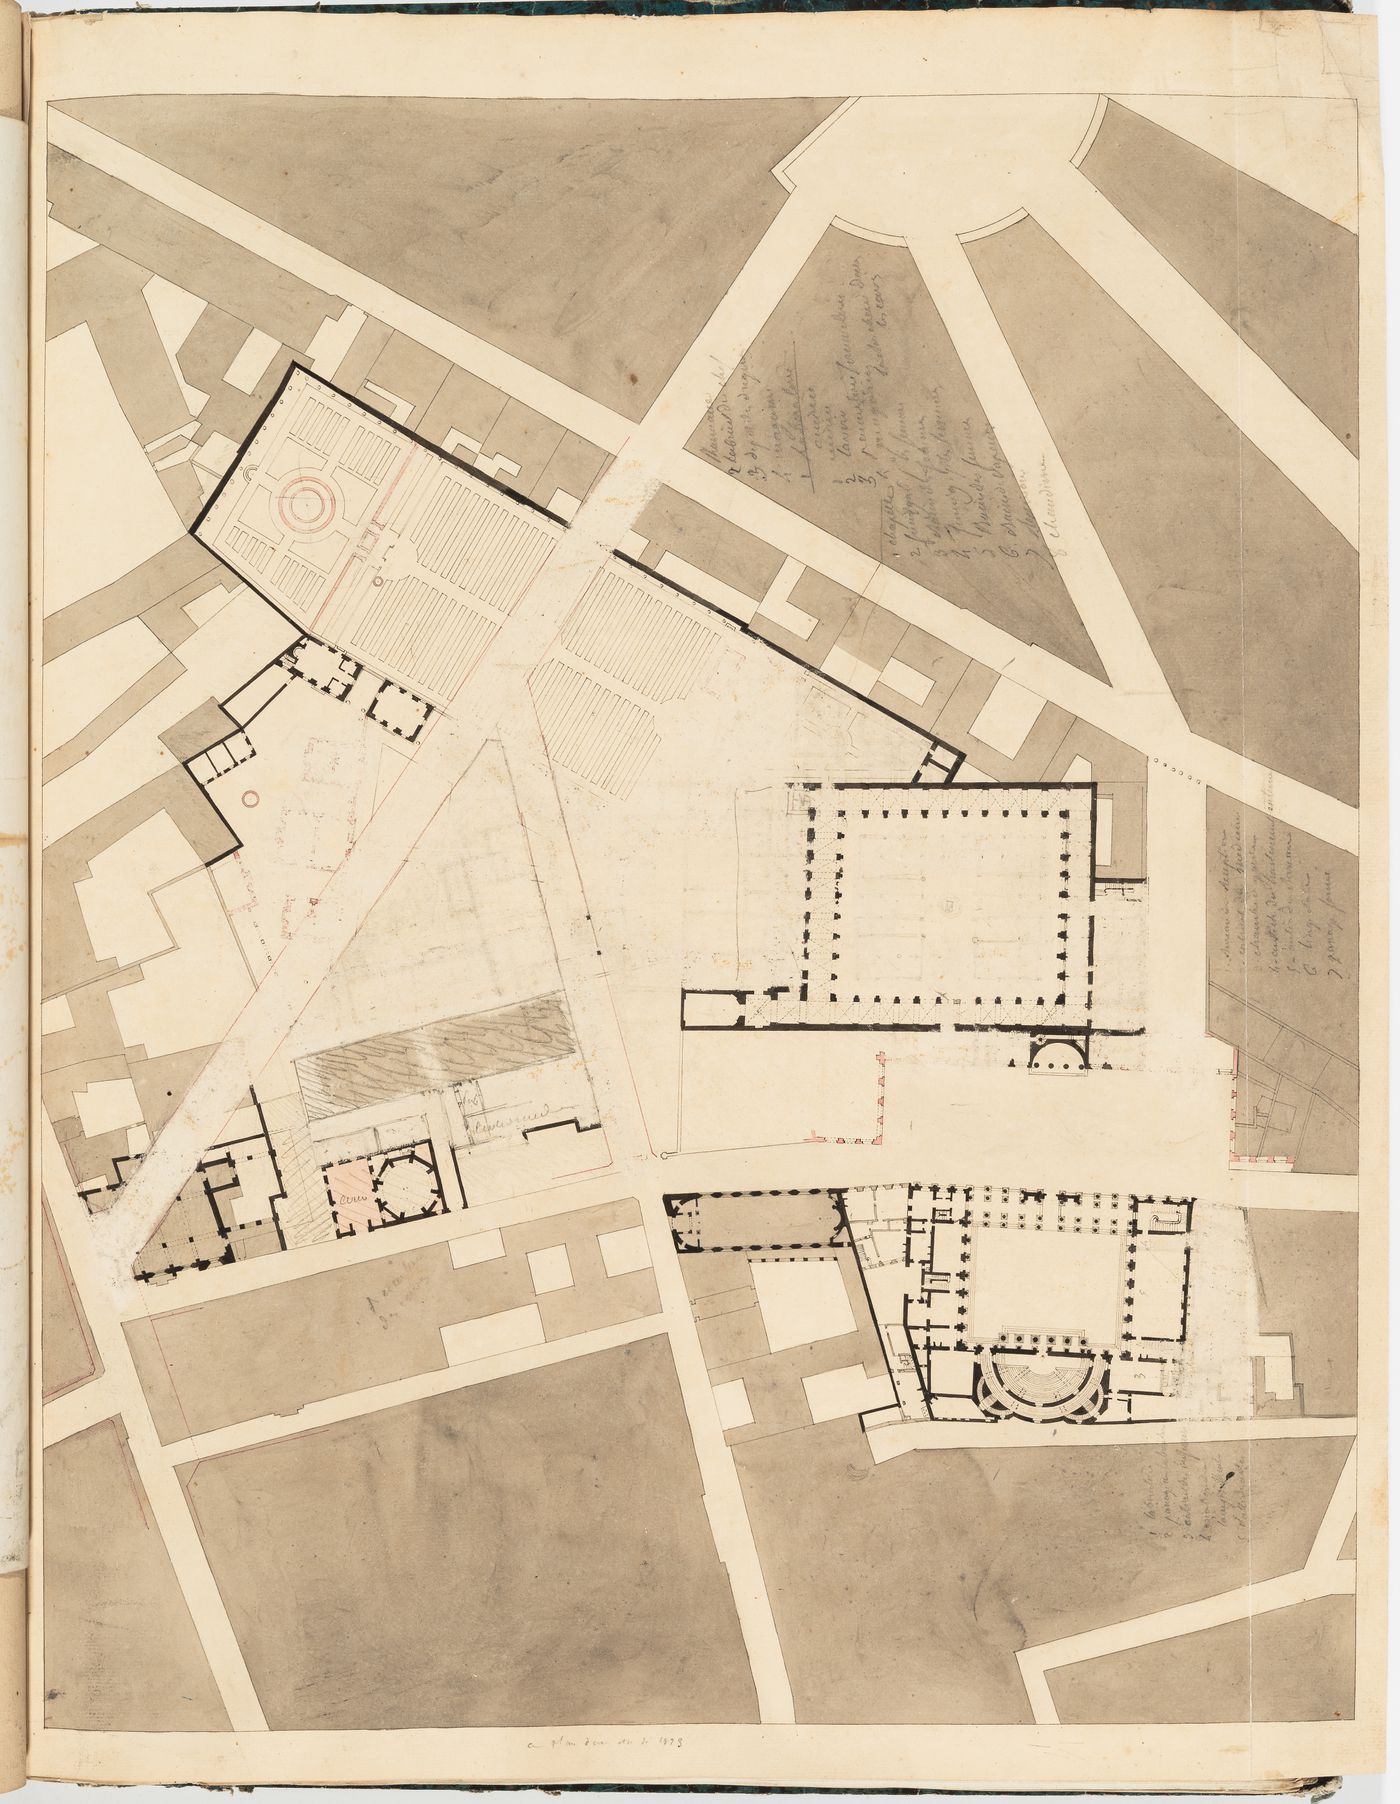 Project for the redevelopment of the École de médecine and surrounding area, Paris: Site plan showing additions and alterations to the buildings